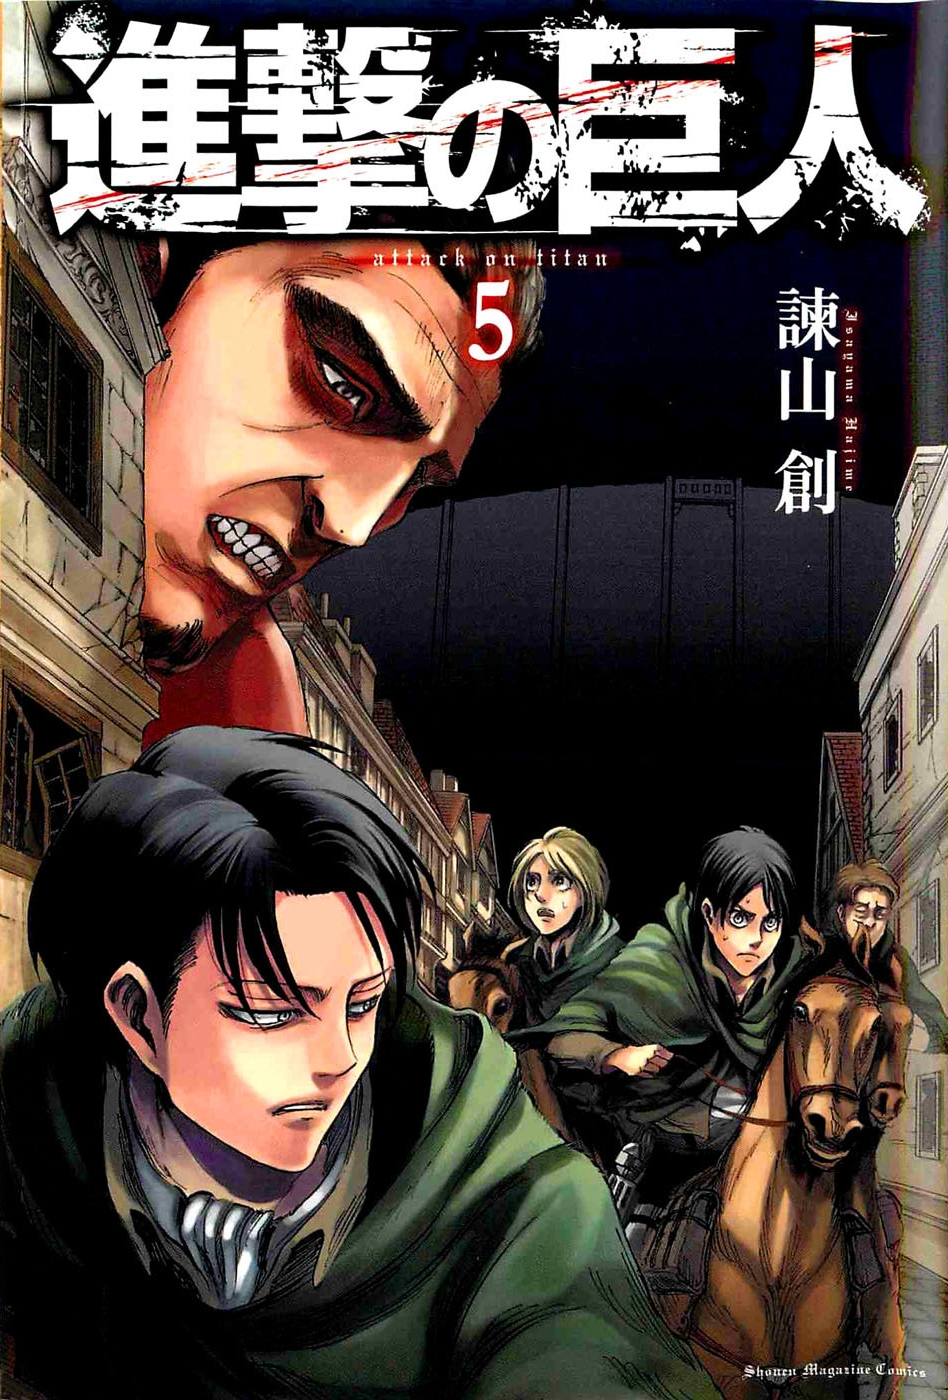 Is Attack On Titan Manga Better Than The Anime